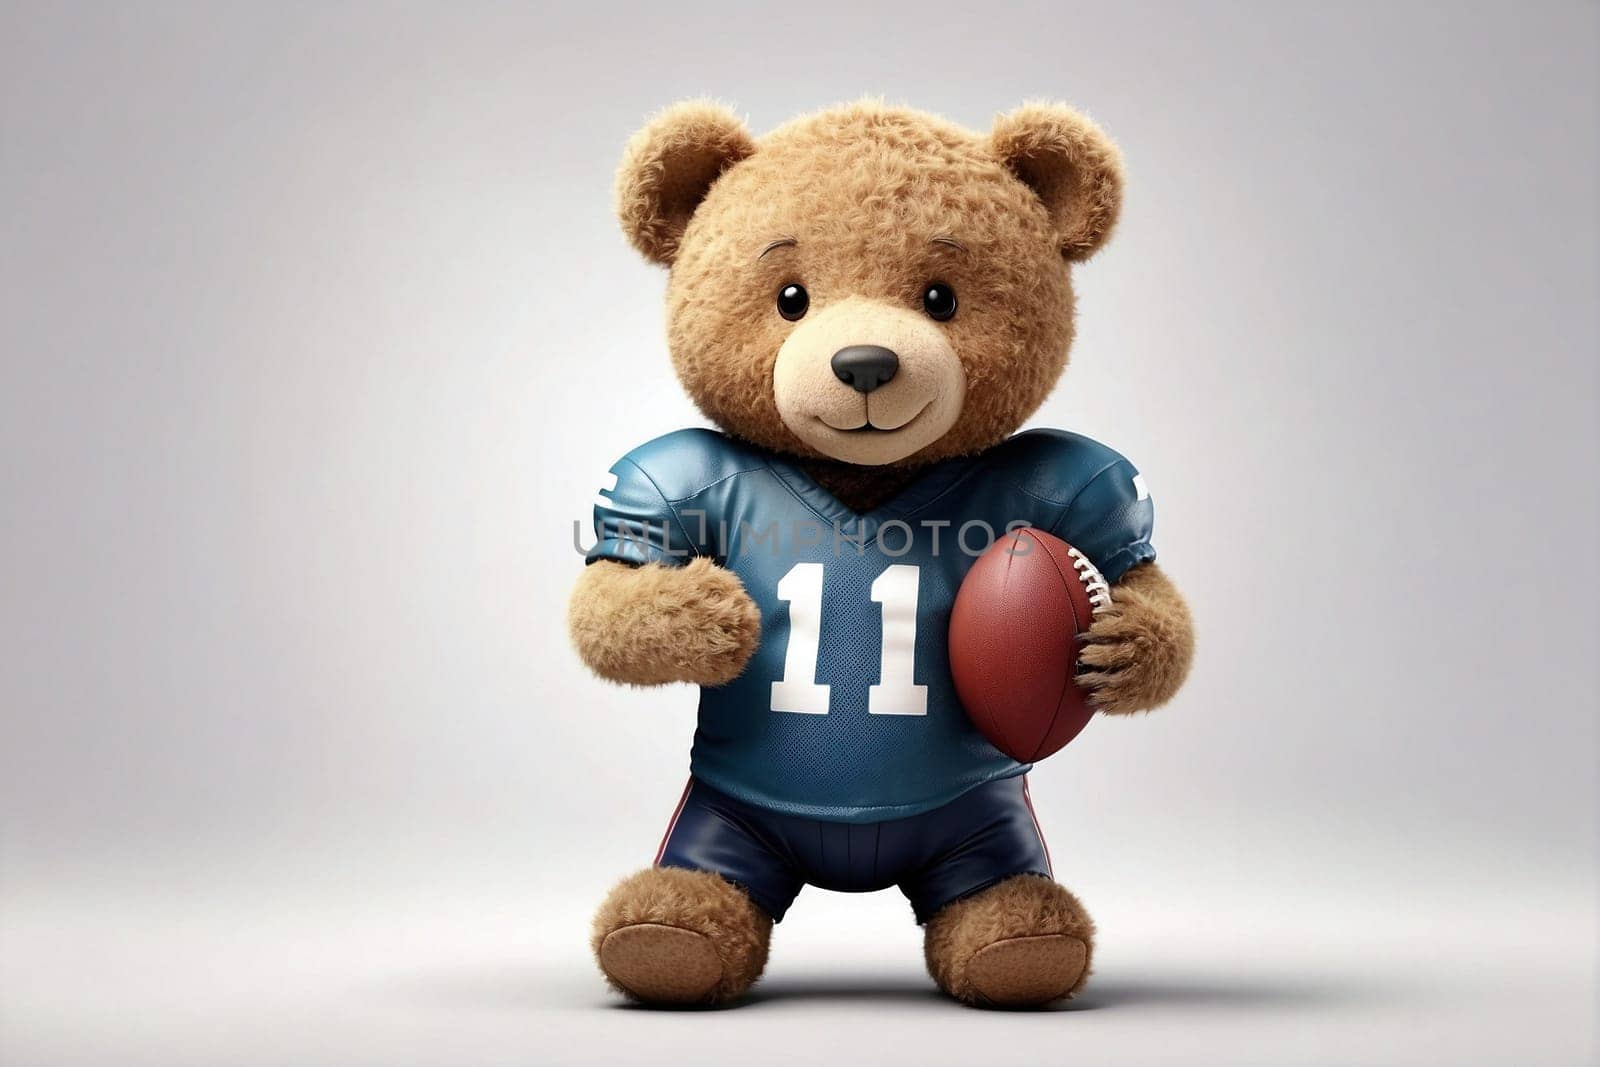 A brown teddy bear holds a football in its paws, showcasing its playful nature.